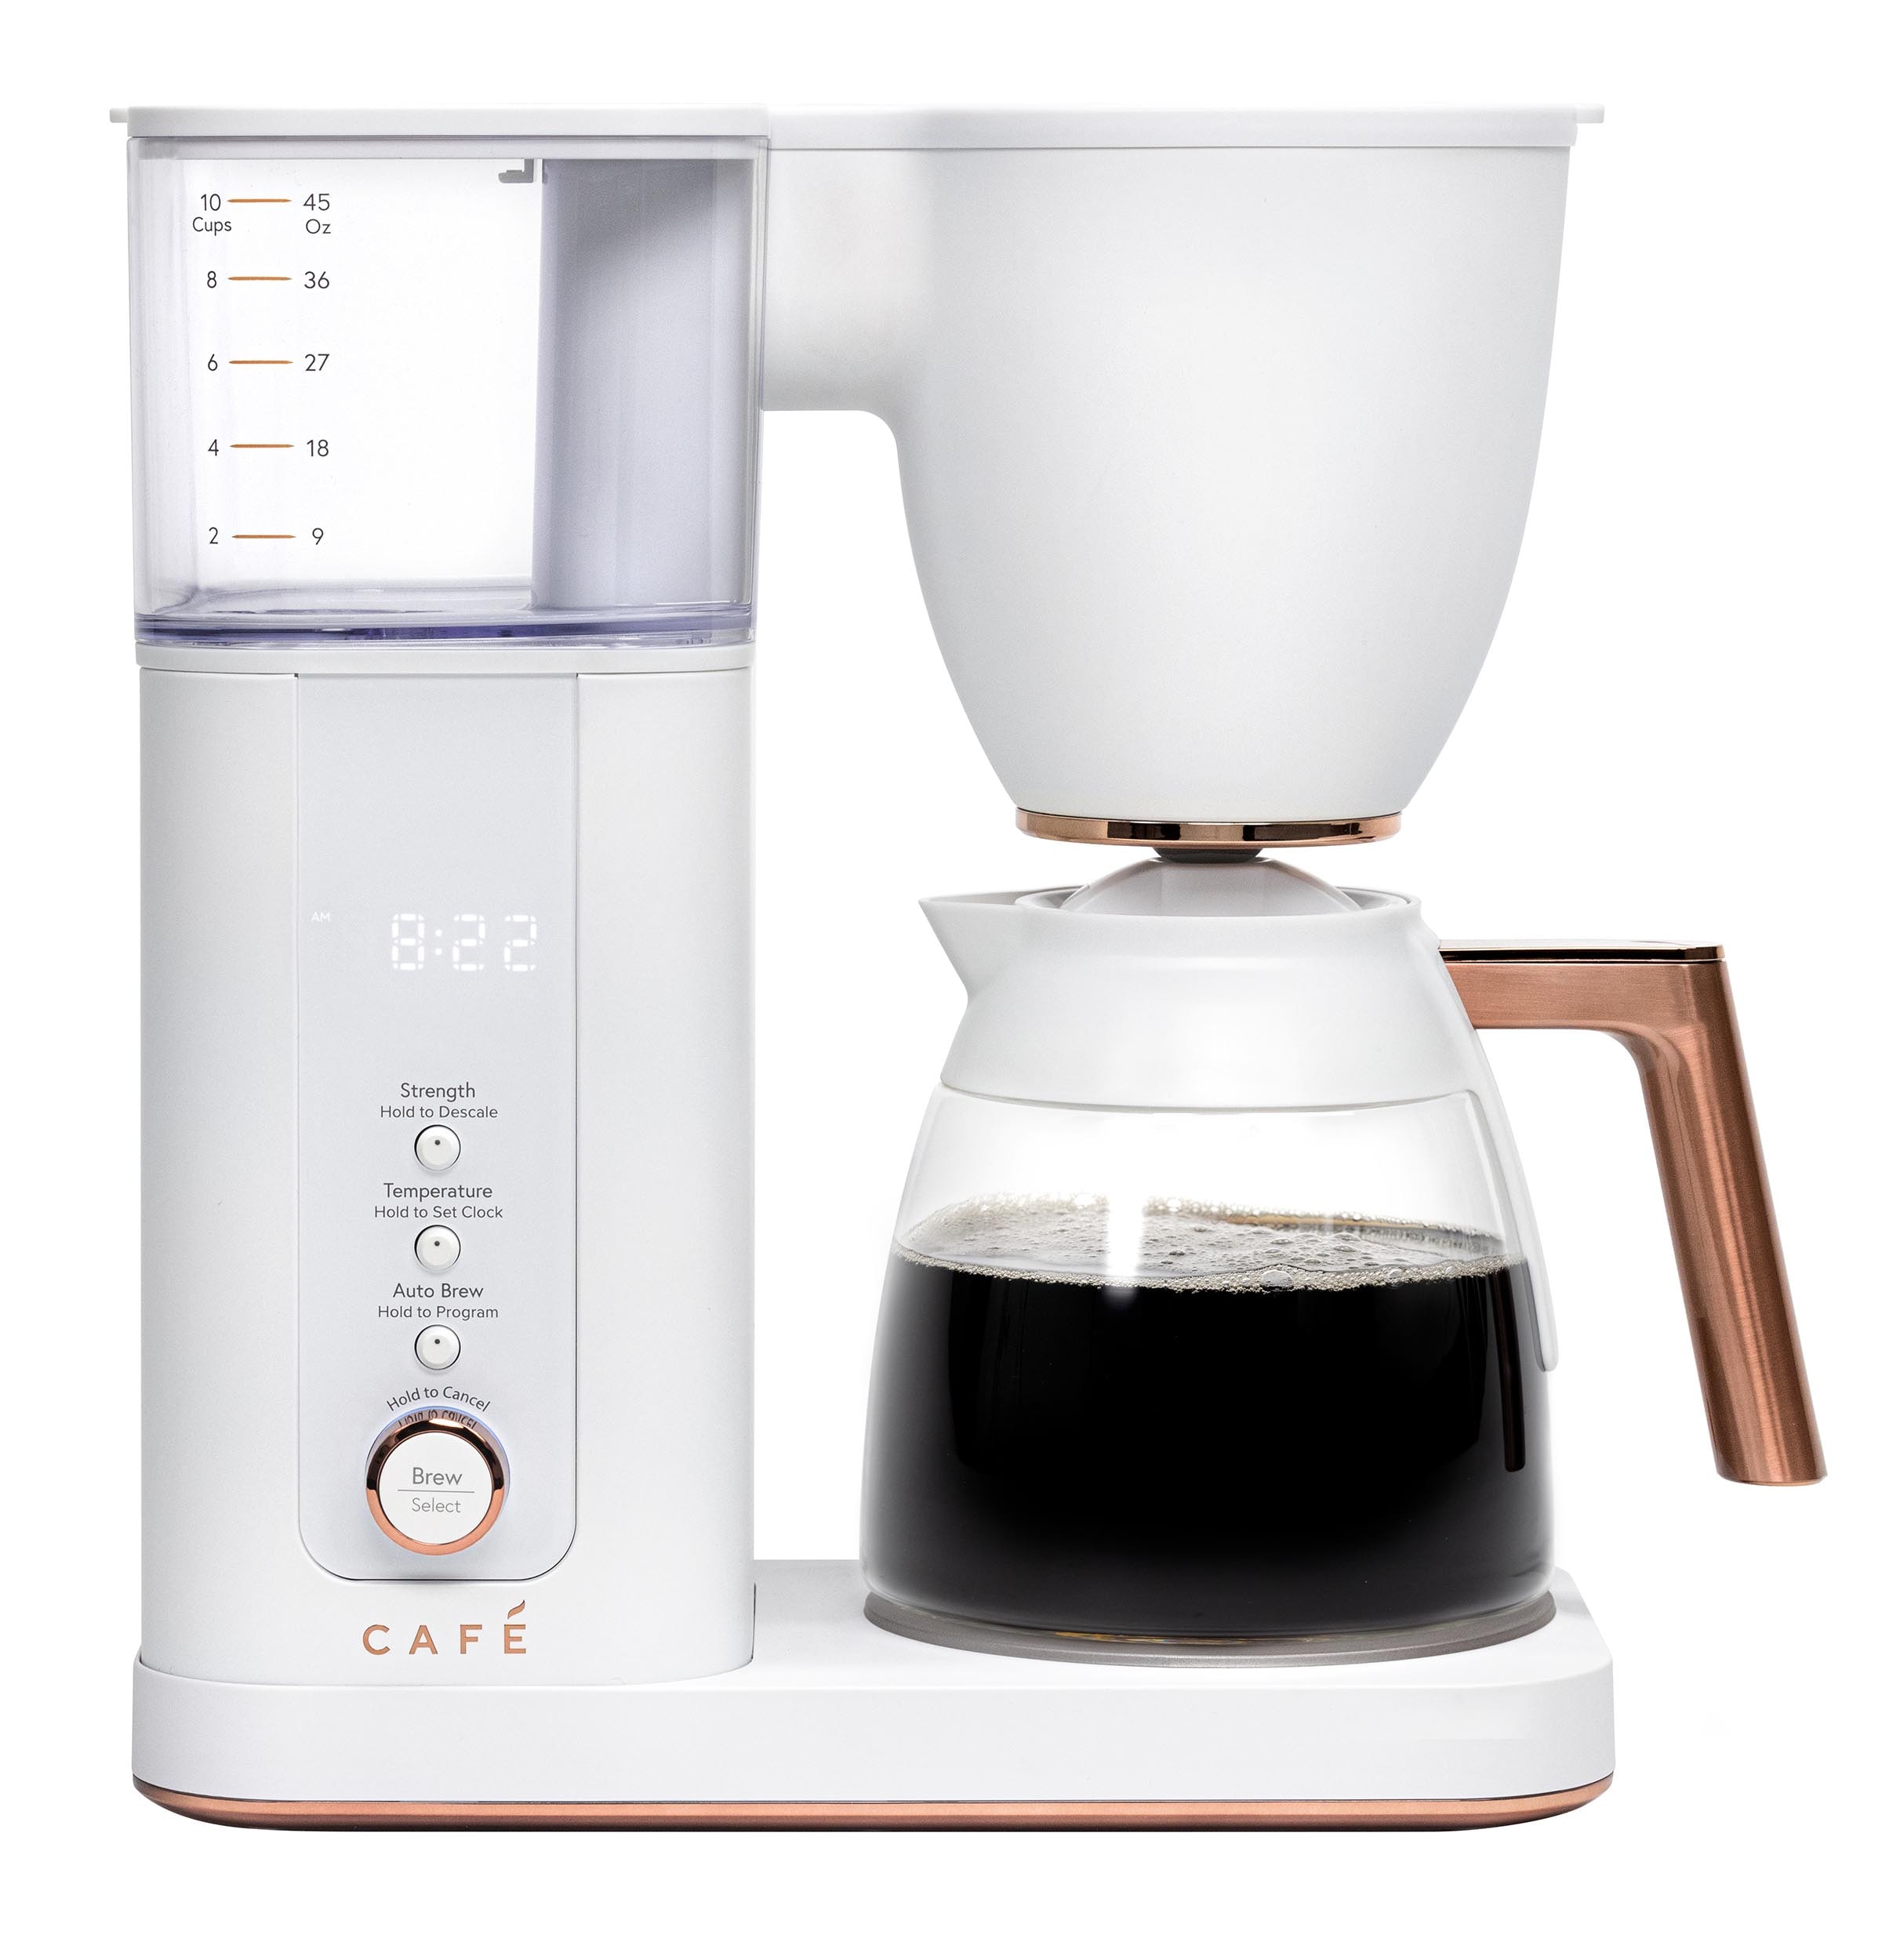  Kaffe Coffee Grinder Electric. Best Coffee Grinders for Home  Use. (14 Cup) Easy On/Off w/Cleaning Brush Included. Copper: Home & Kitchen